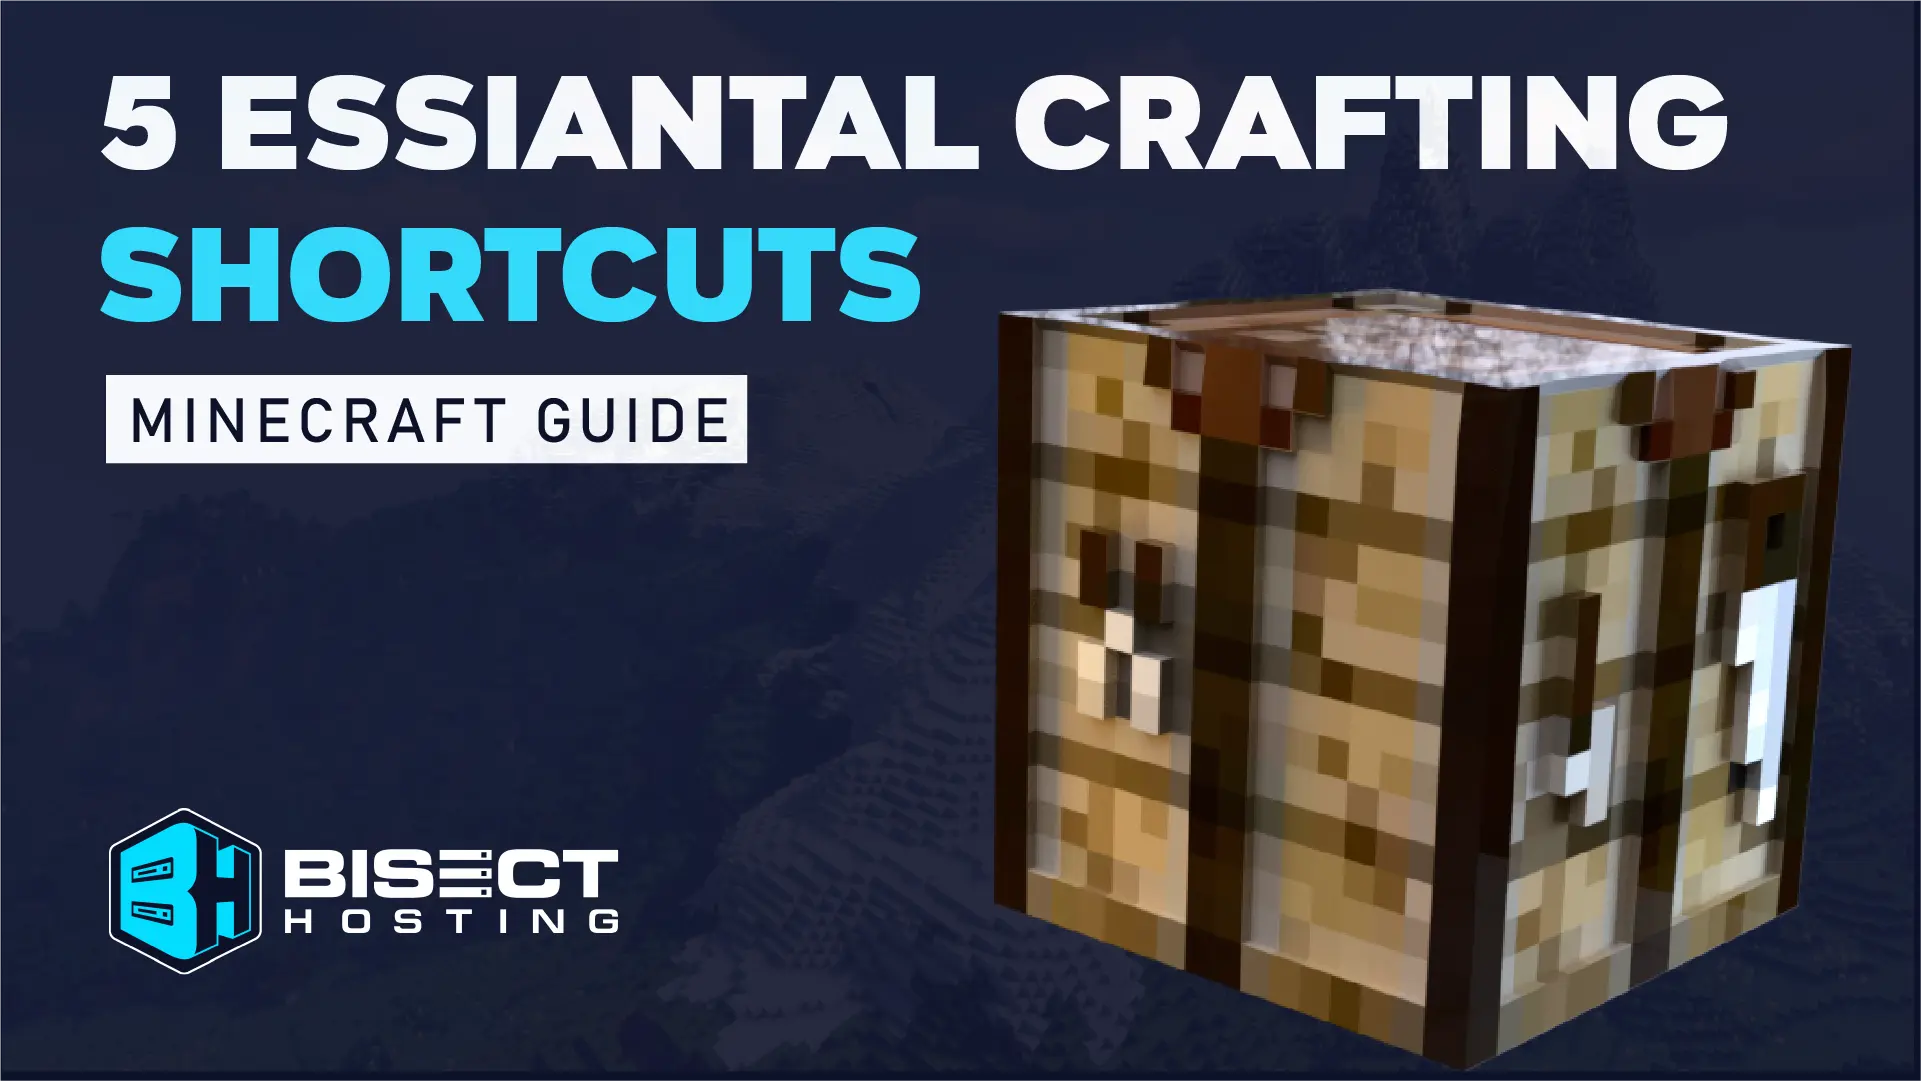 5 Essential Crafting Shortcuts for Minecraft